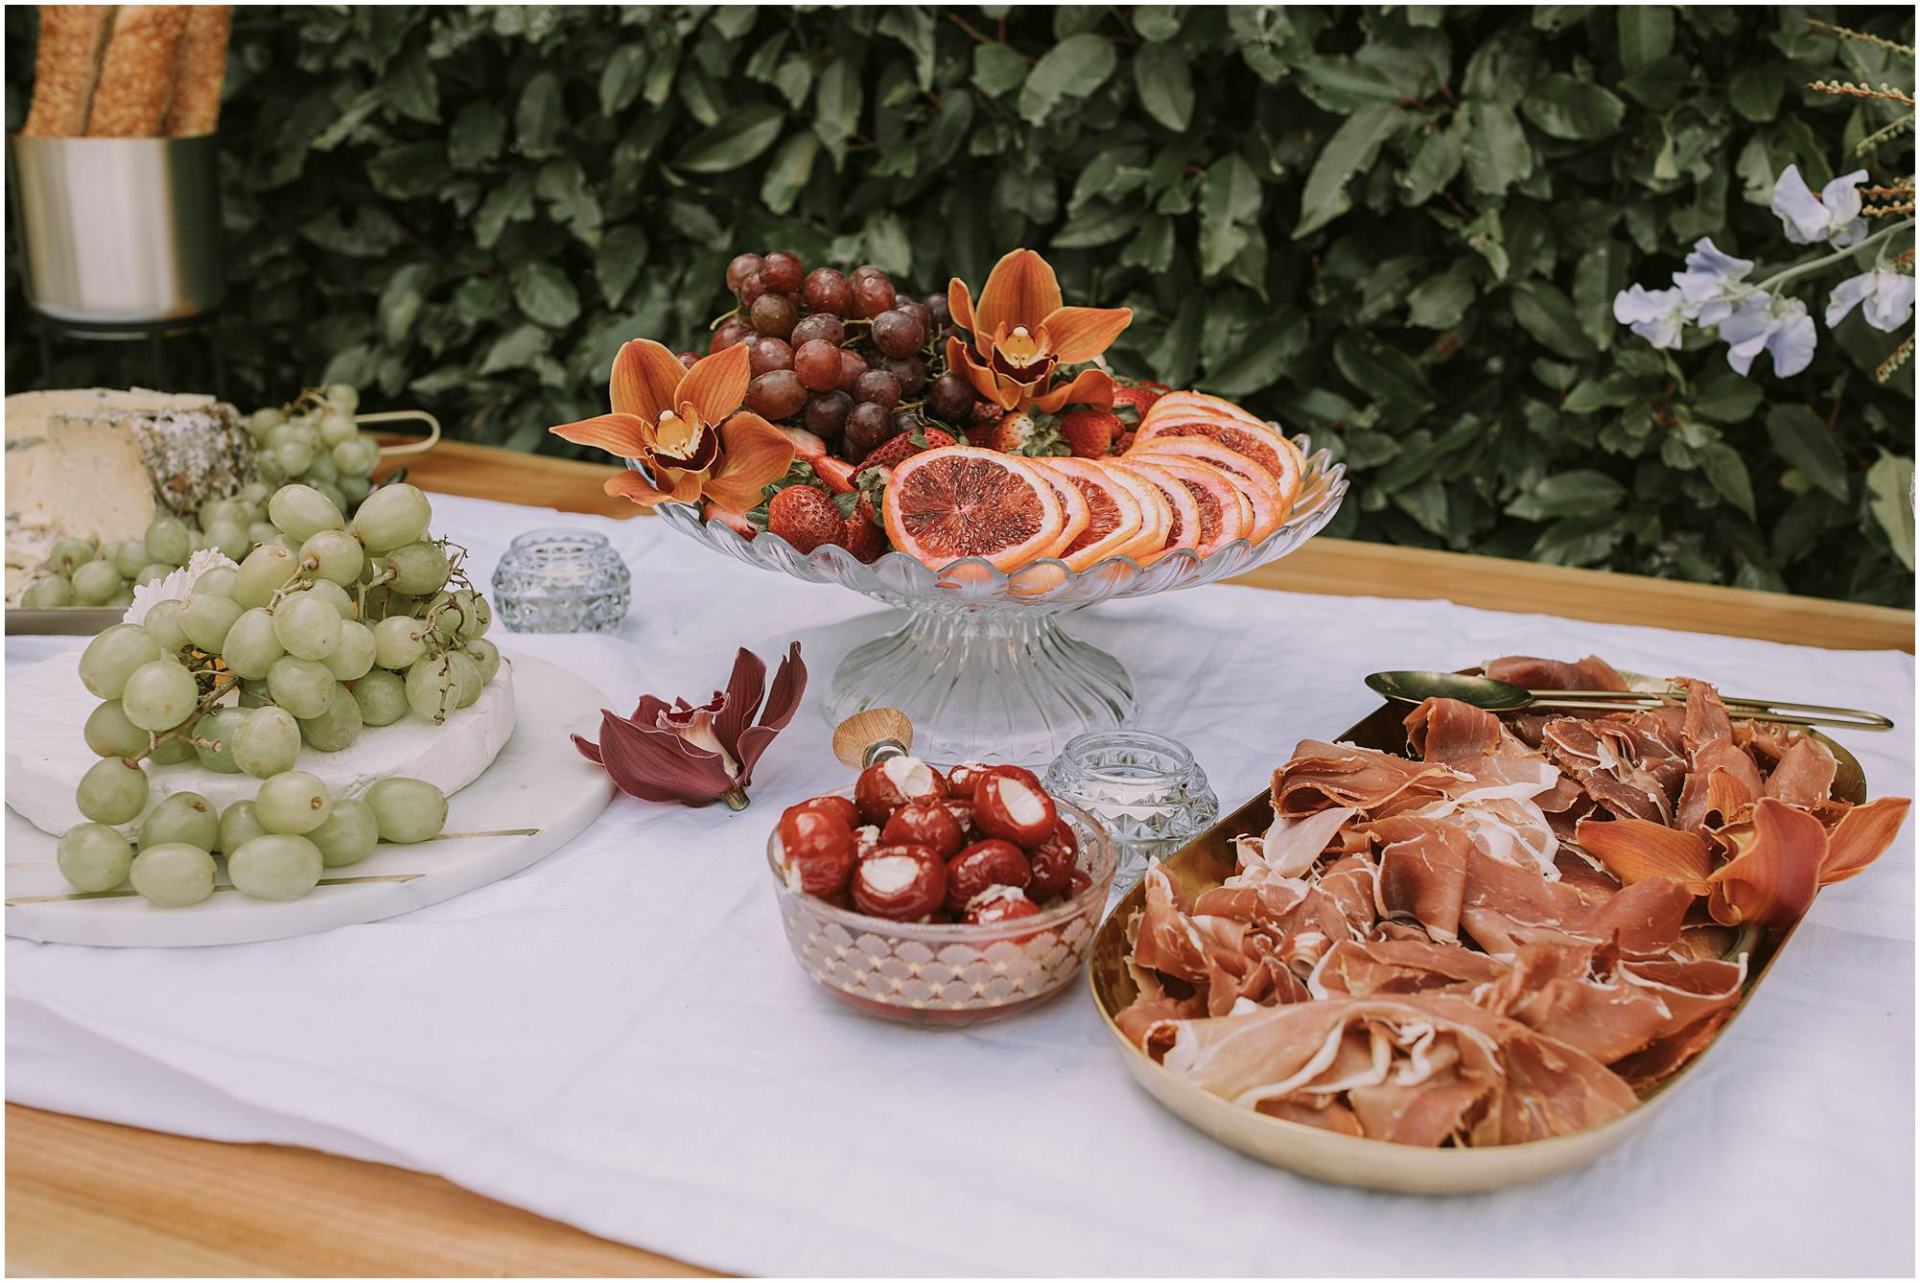 Charlotte Kiri Photography - Commercial Photography of a table of antipasto cheese, fruit, and cured meat for My Secret Picnic in Wanaka, New Zealand.